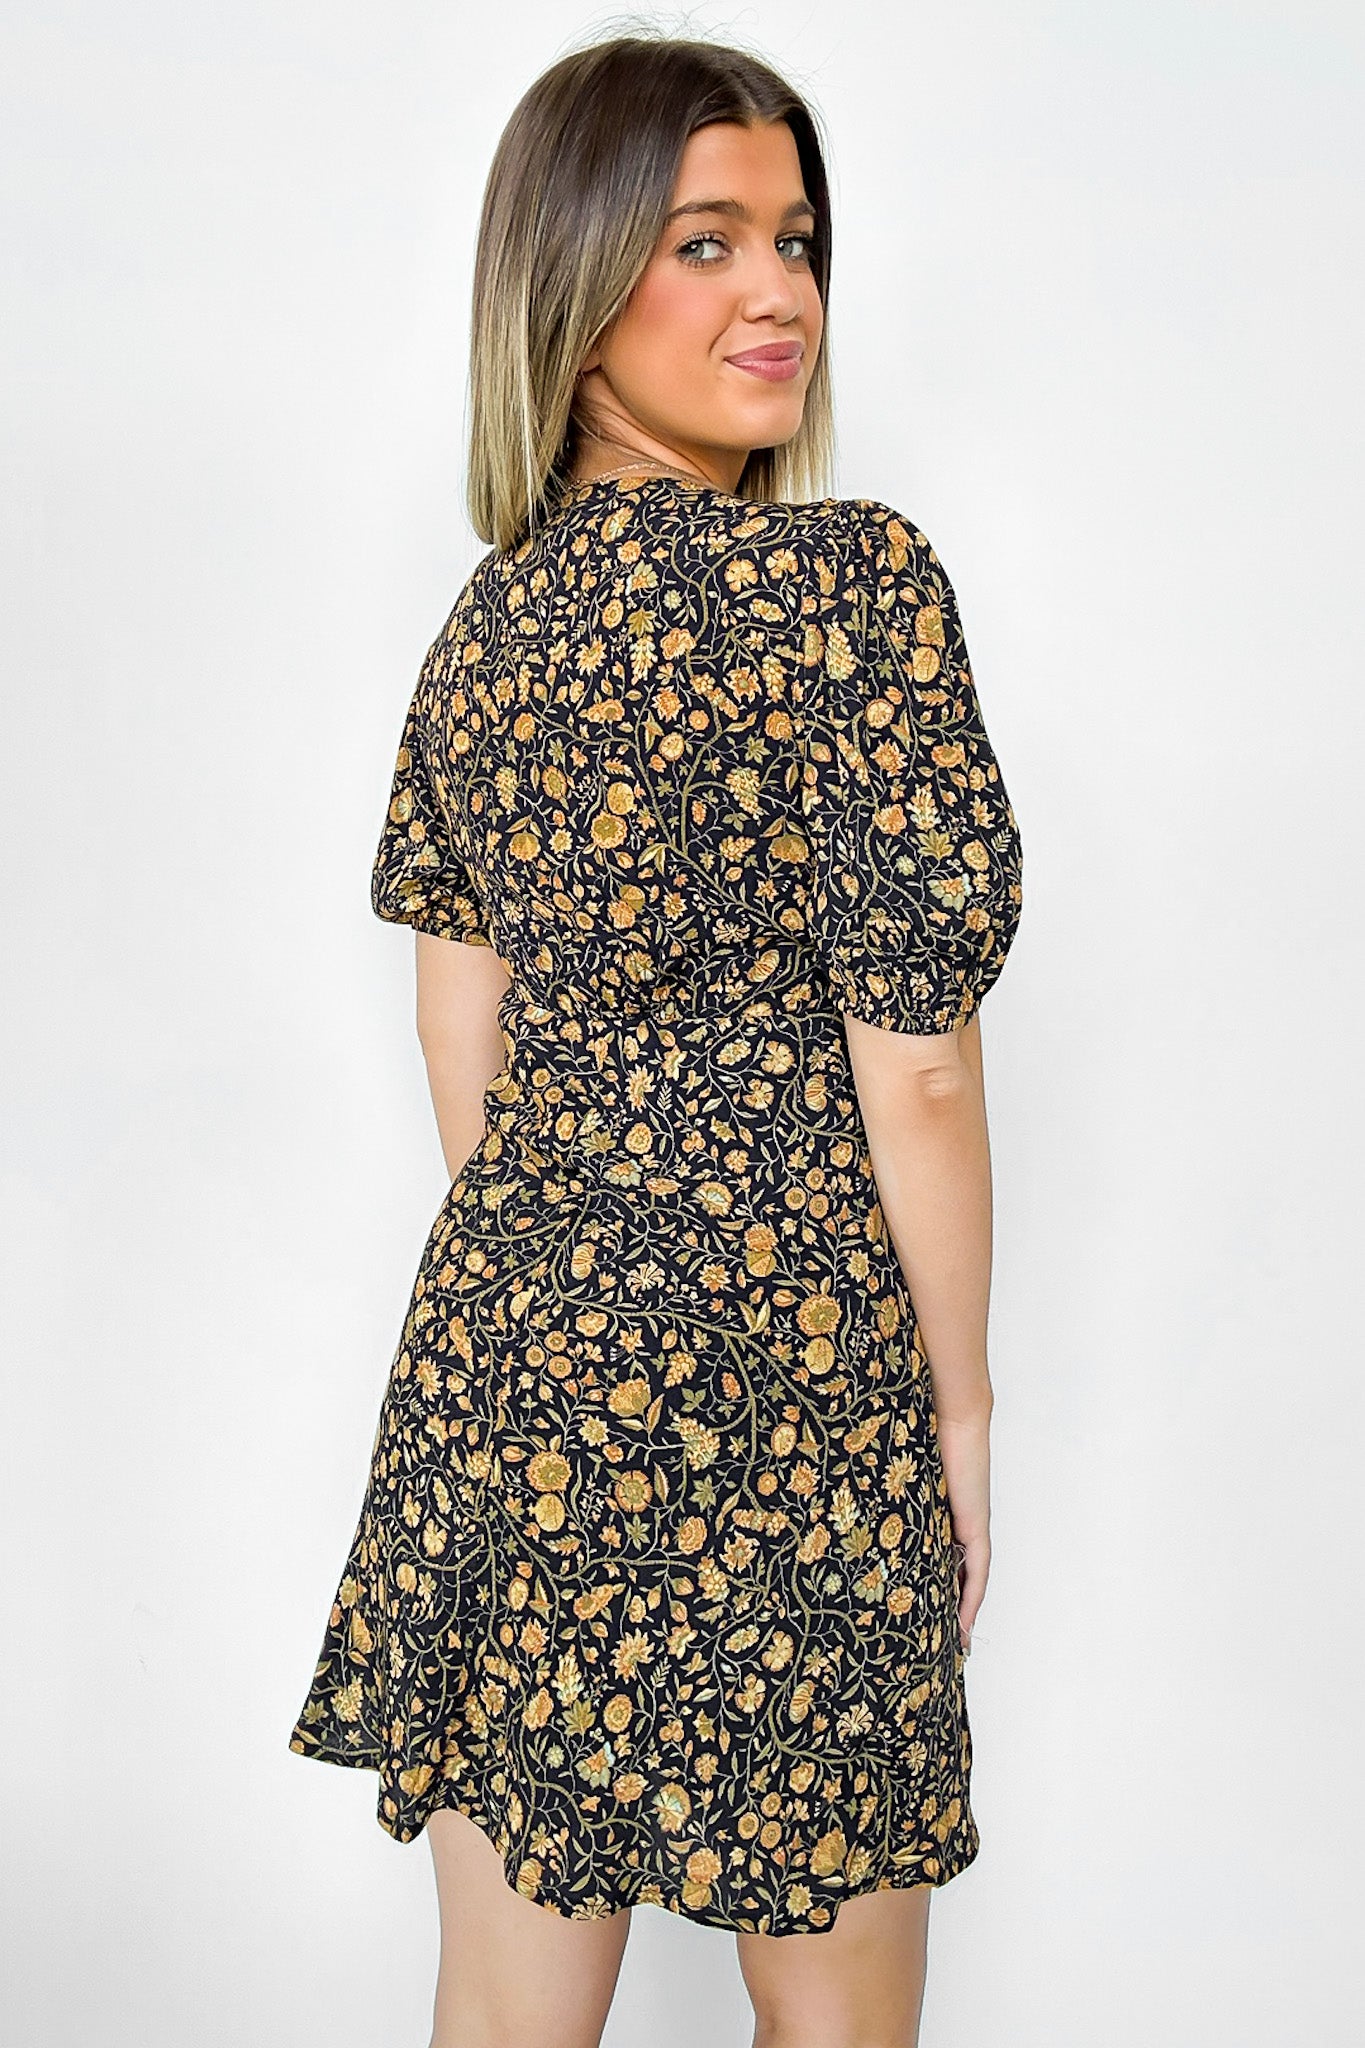  Charming Vision Floral Puff Sleeve Dress - Madison and Mallory